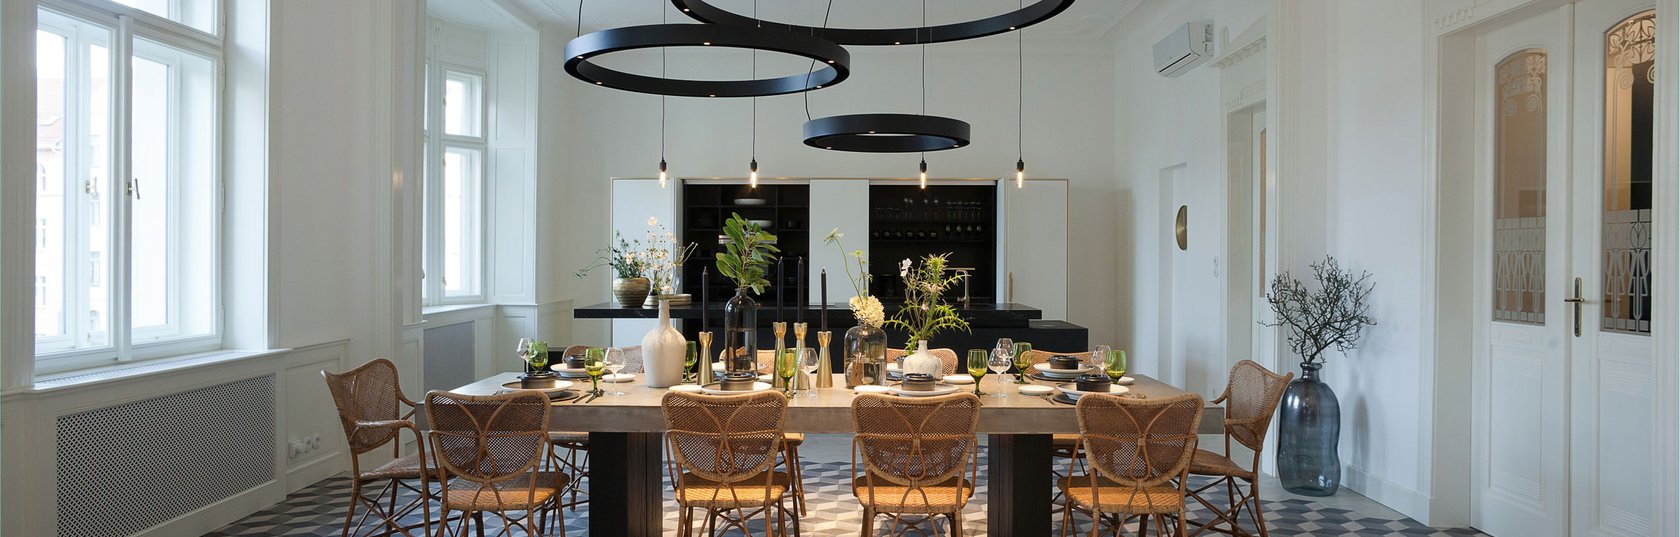 Lighting design: different style ideas for lighting above your dining table